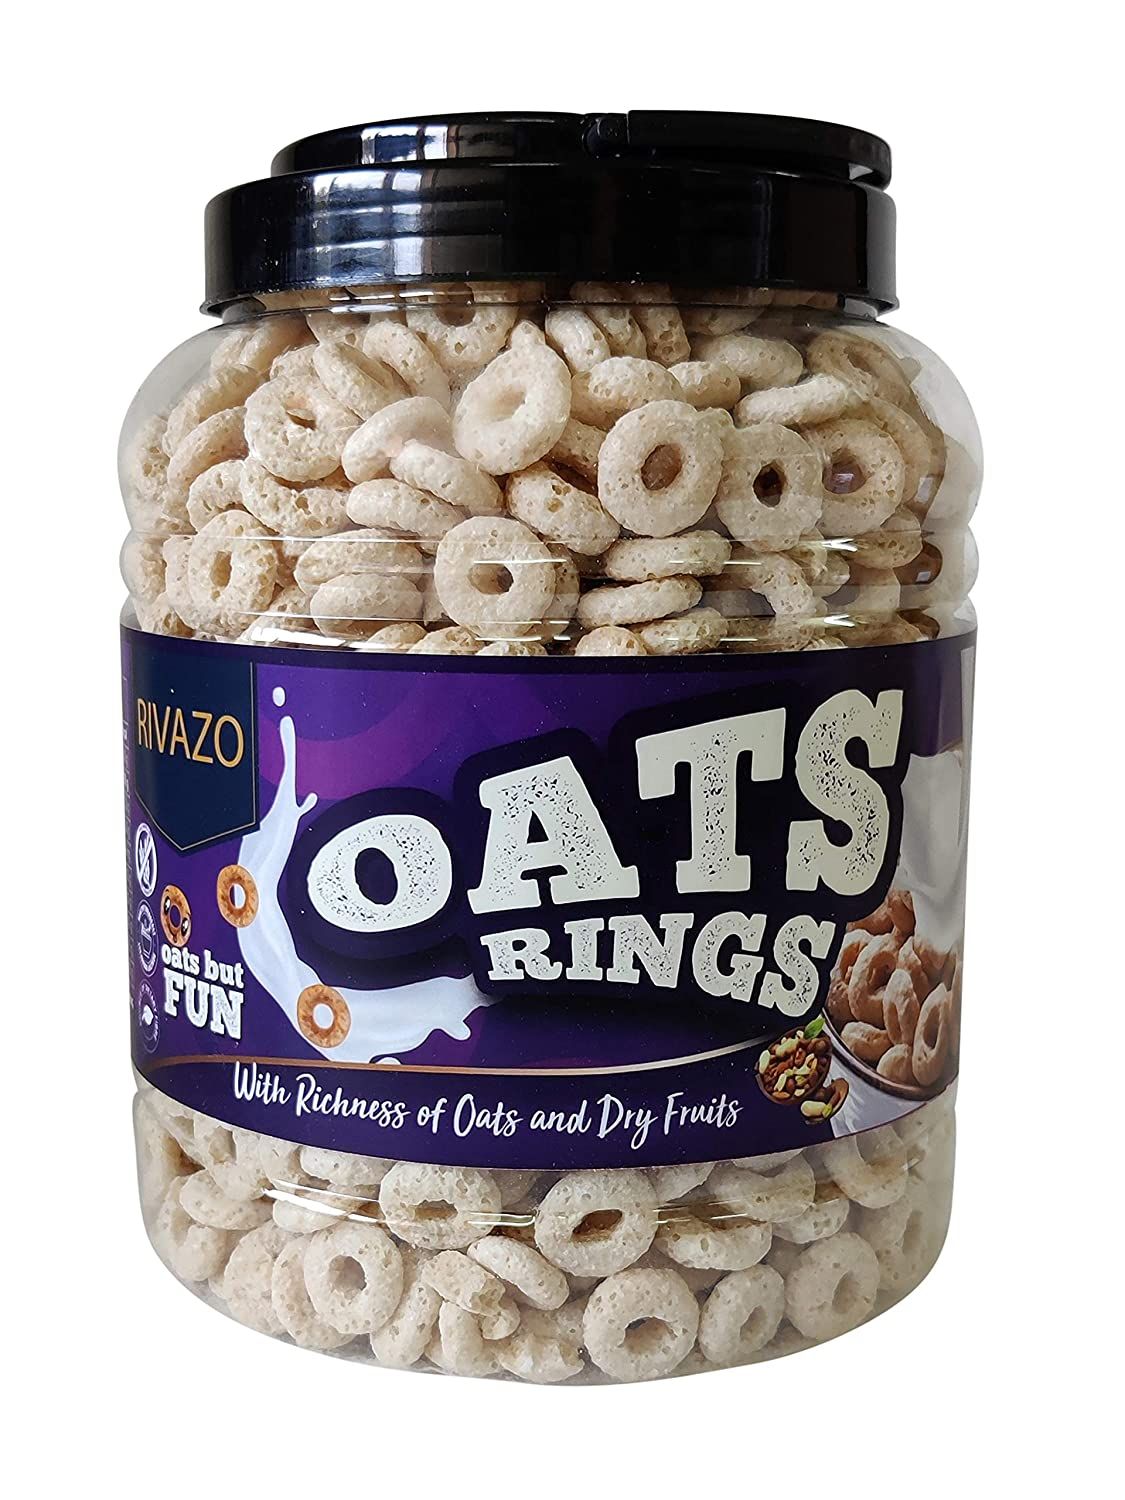 Rivazo Whole Grain Oats Rings with Added Richness of Dry Fruits Image